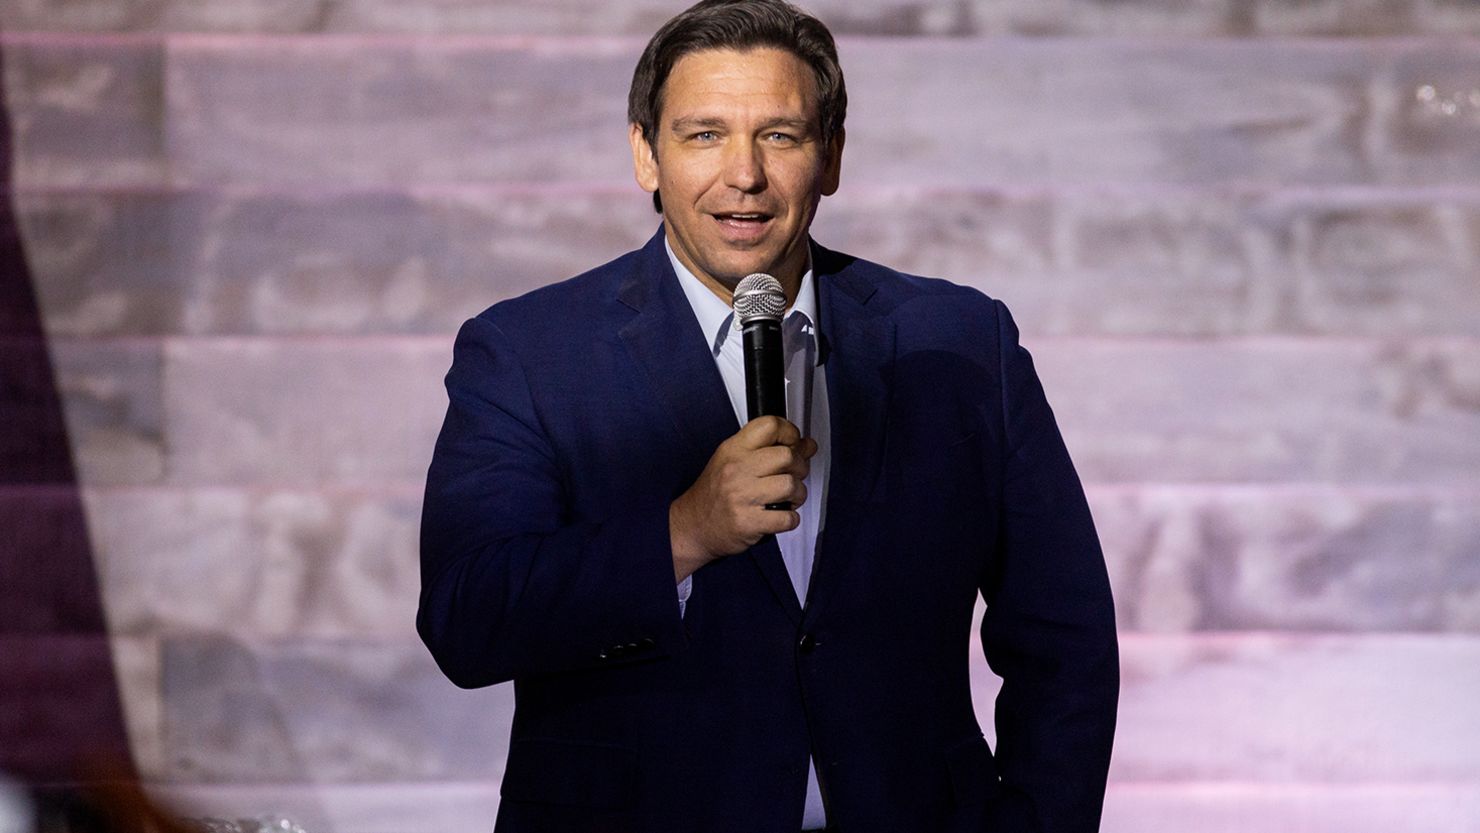 Florida Gov. Ron DeSantis campaigns with Nevada GOP Senate hopeful Adam Laxalt at a rally for Laxalt at Stoney's Rockin' Country on April 27, 2022 in Las Vegas, Nevada.